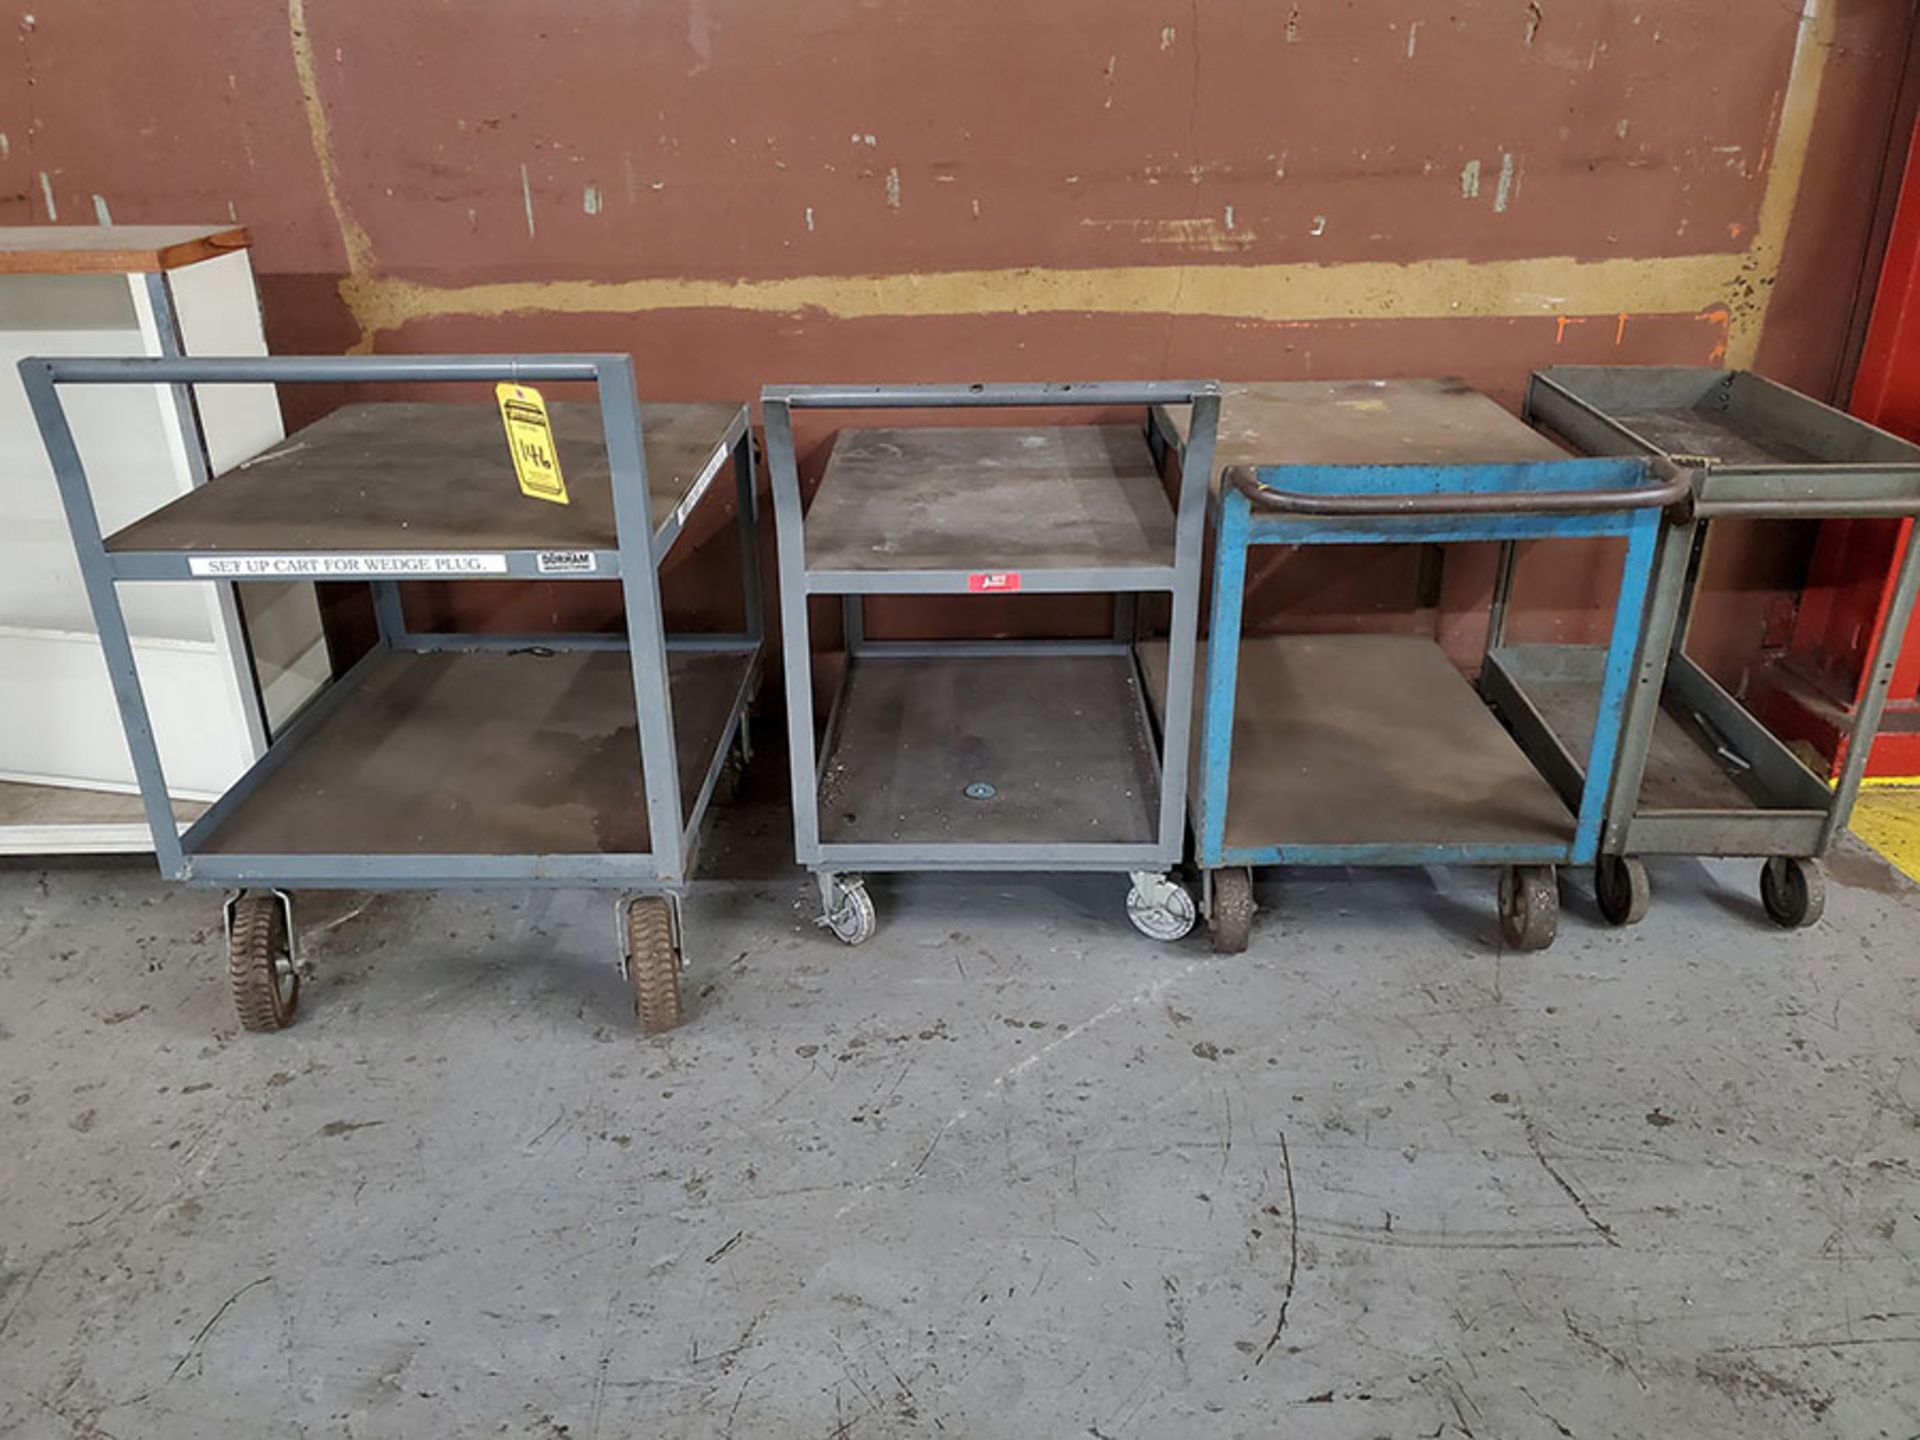 (10+) METAL AND PLASTIC SHOP CARTS, ASSORTED SIZES - Image 7 of 9